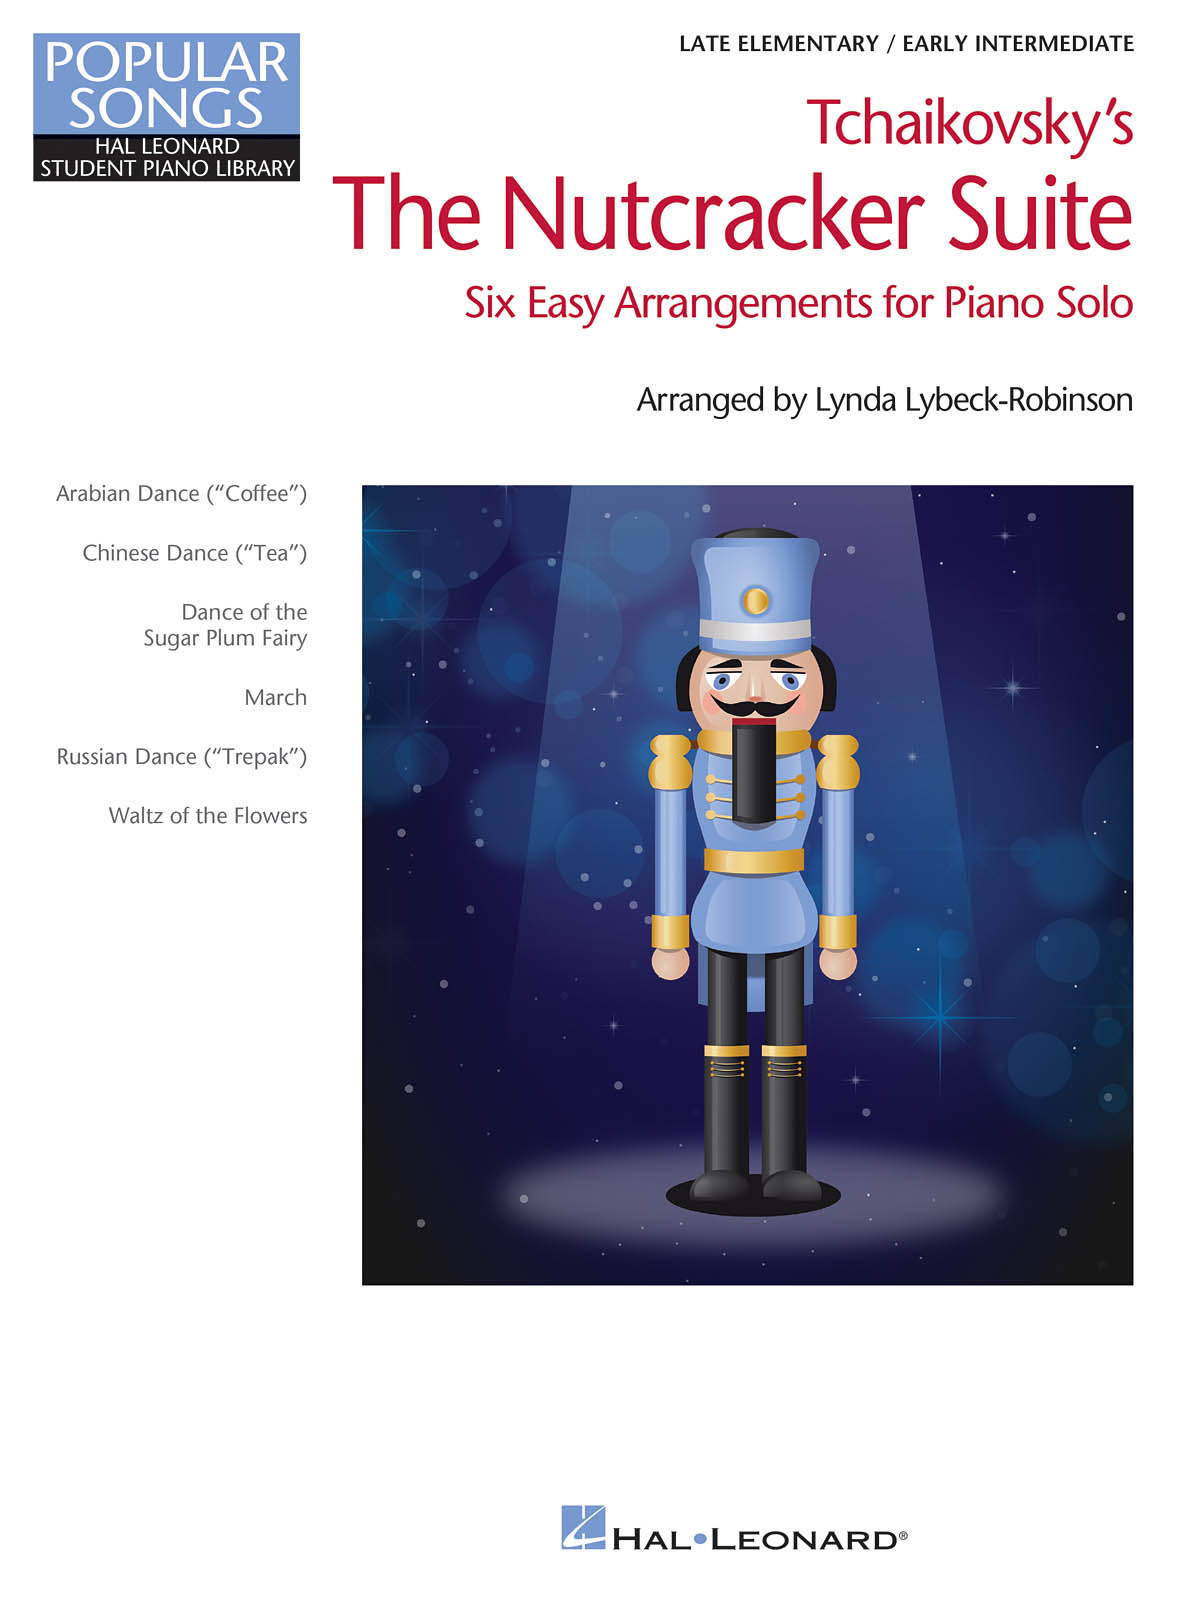 Tchaikovsky's The Nutcracker Suite - Hal Leonard Student Piano Library Popular Songs Series Late Elementary